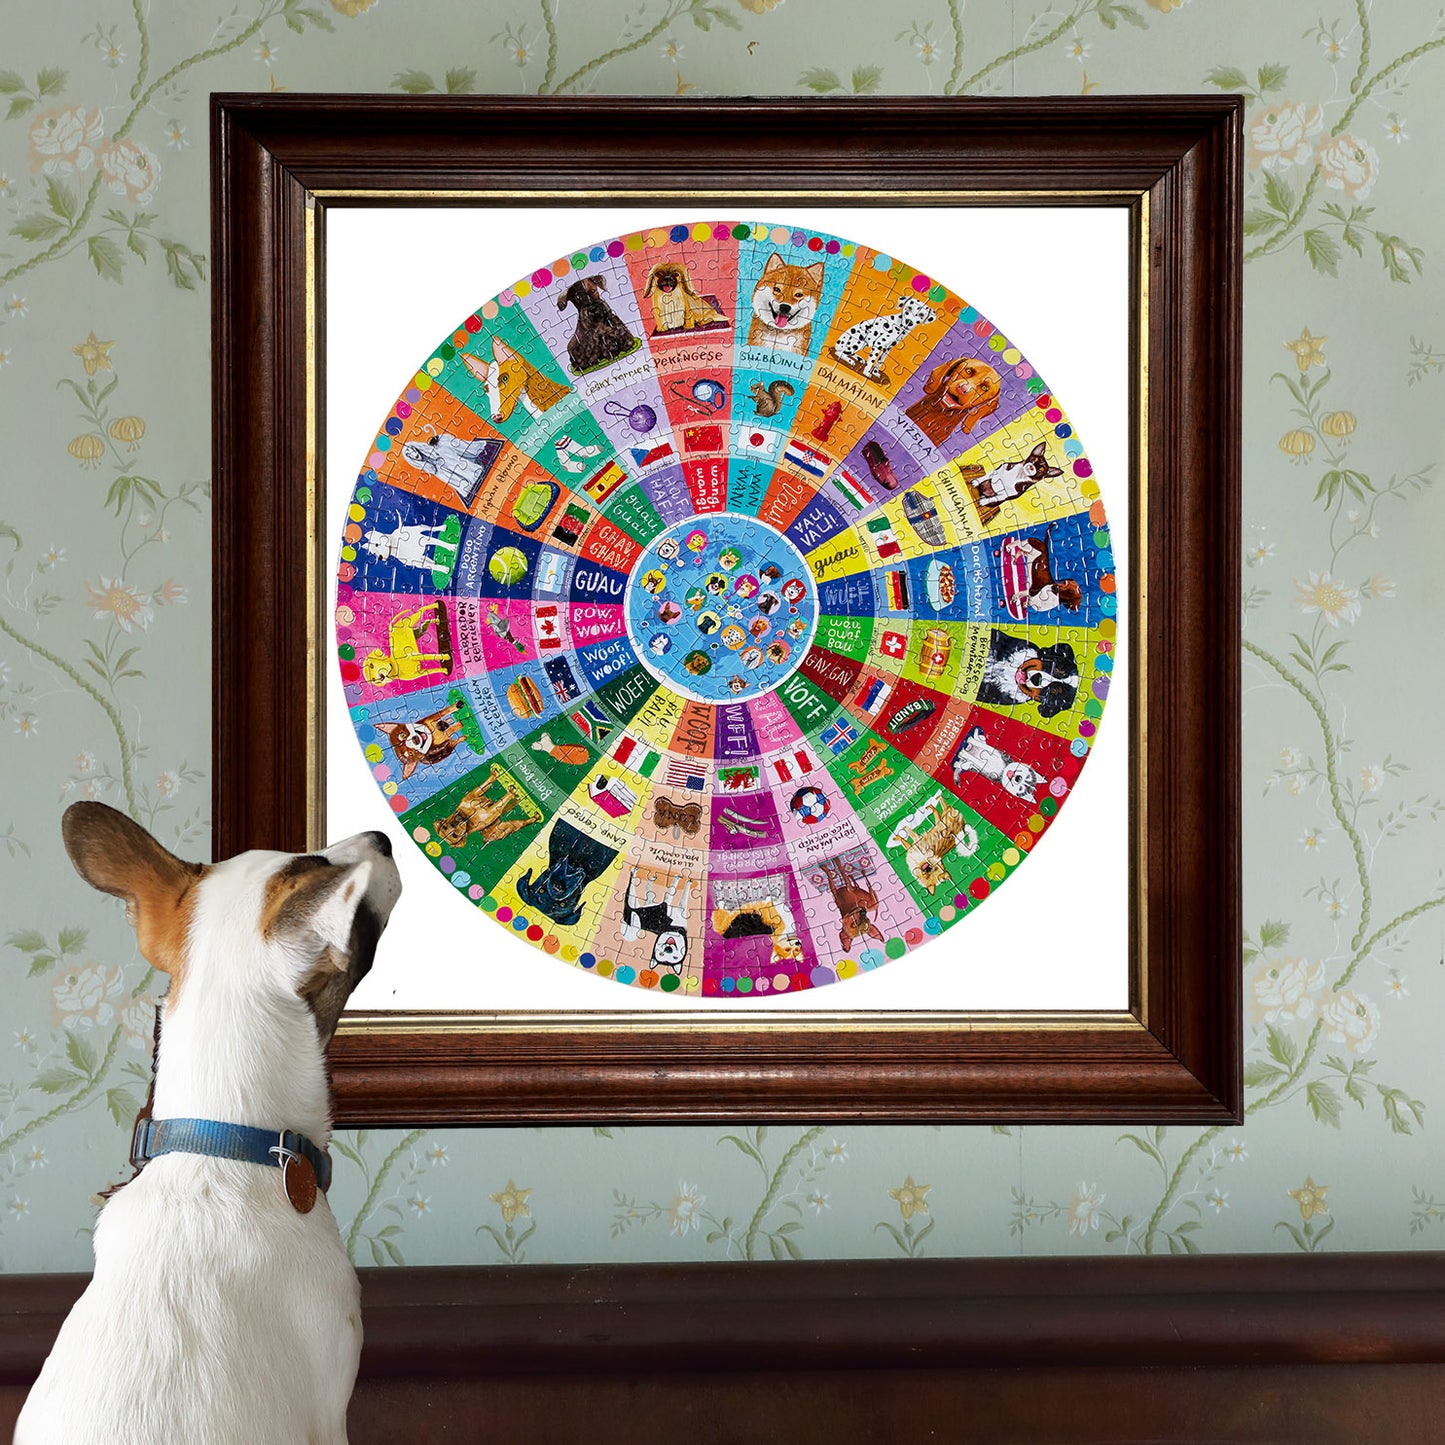 Dogs of the World 500 Piece Jigsaw Puzzle | eeBoo Piece & Love Amazing Gifts for Teens & Adults 14+